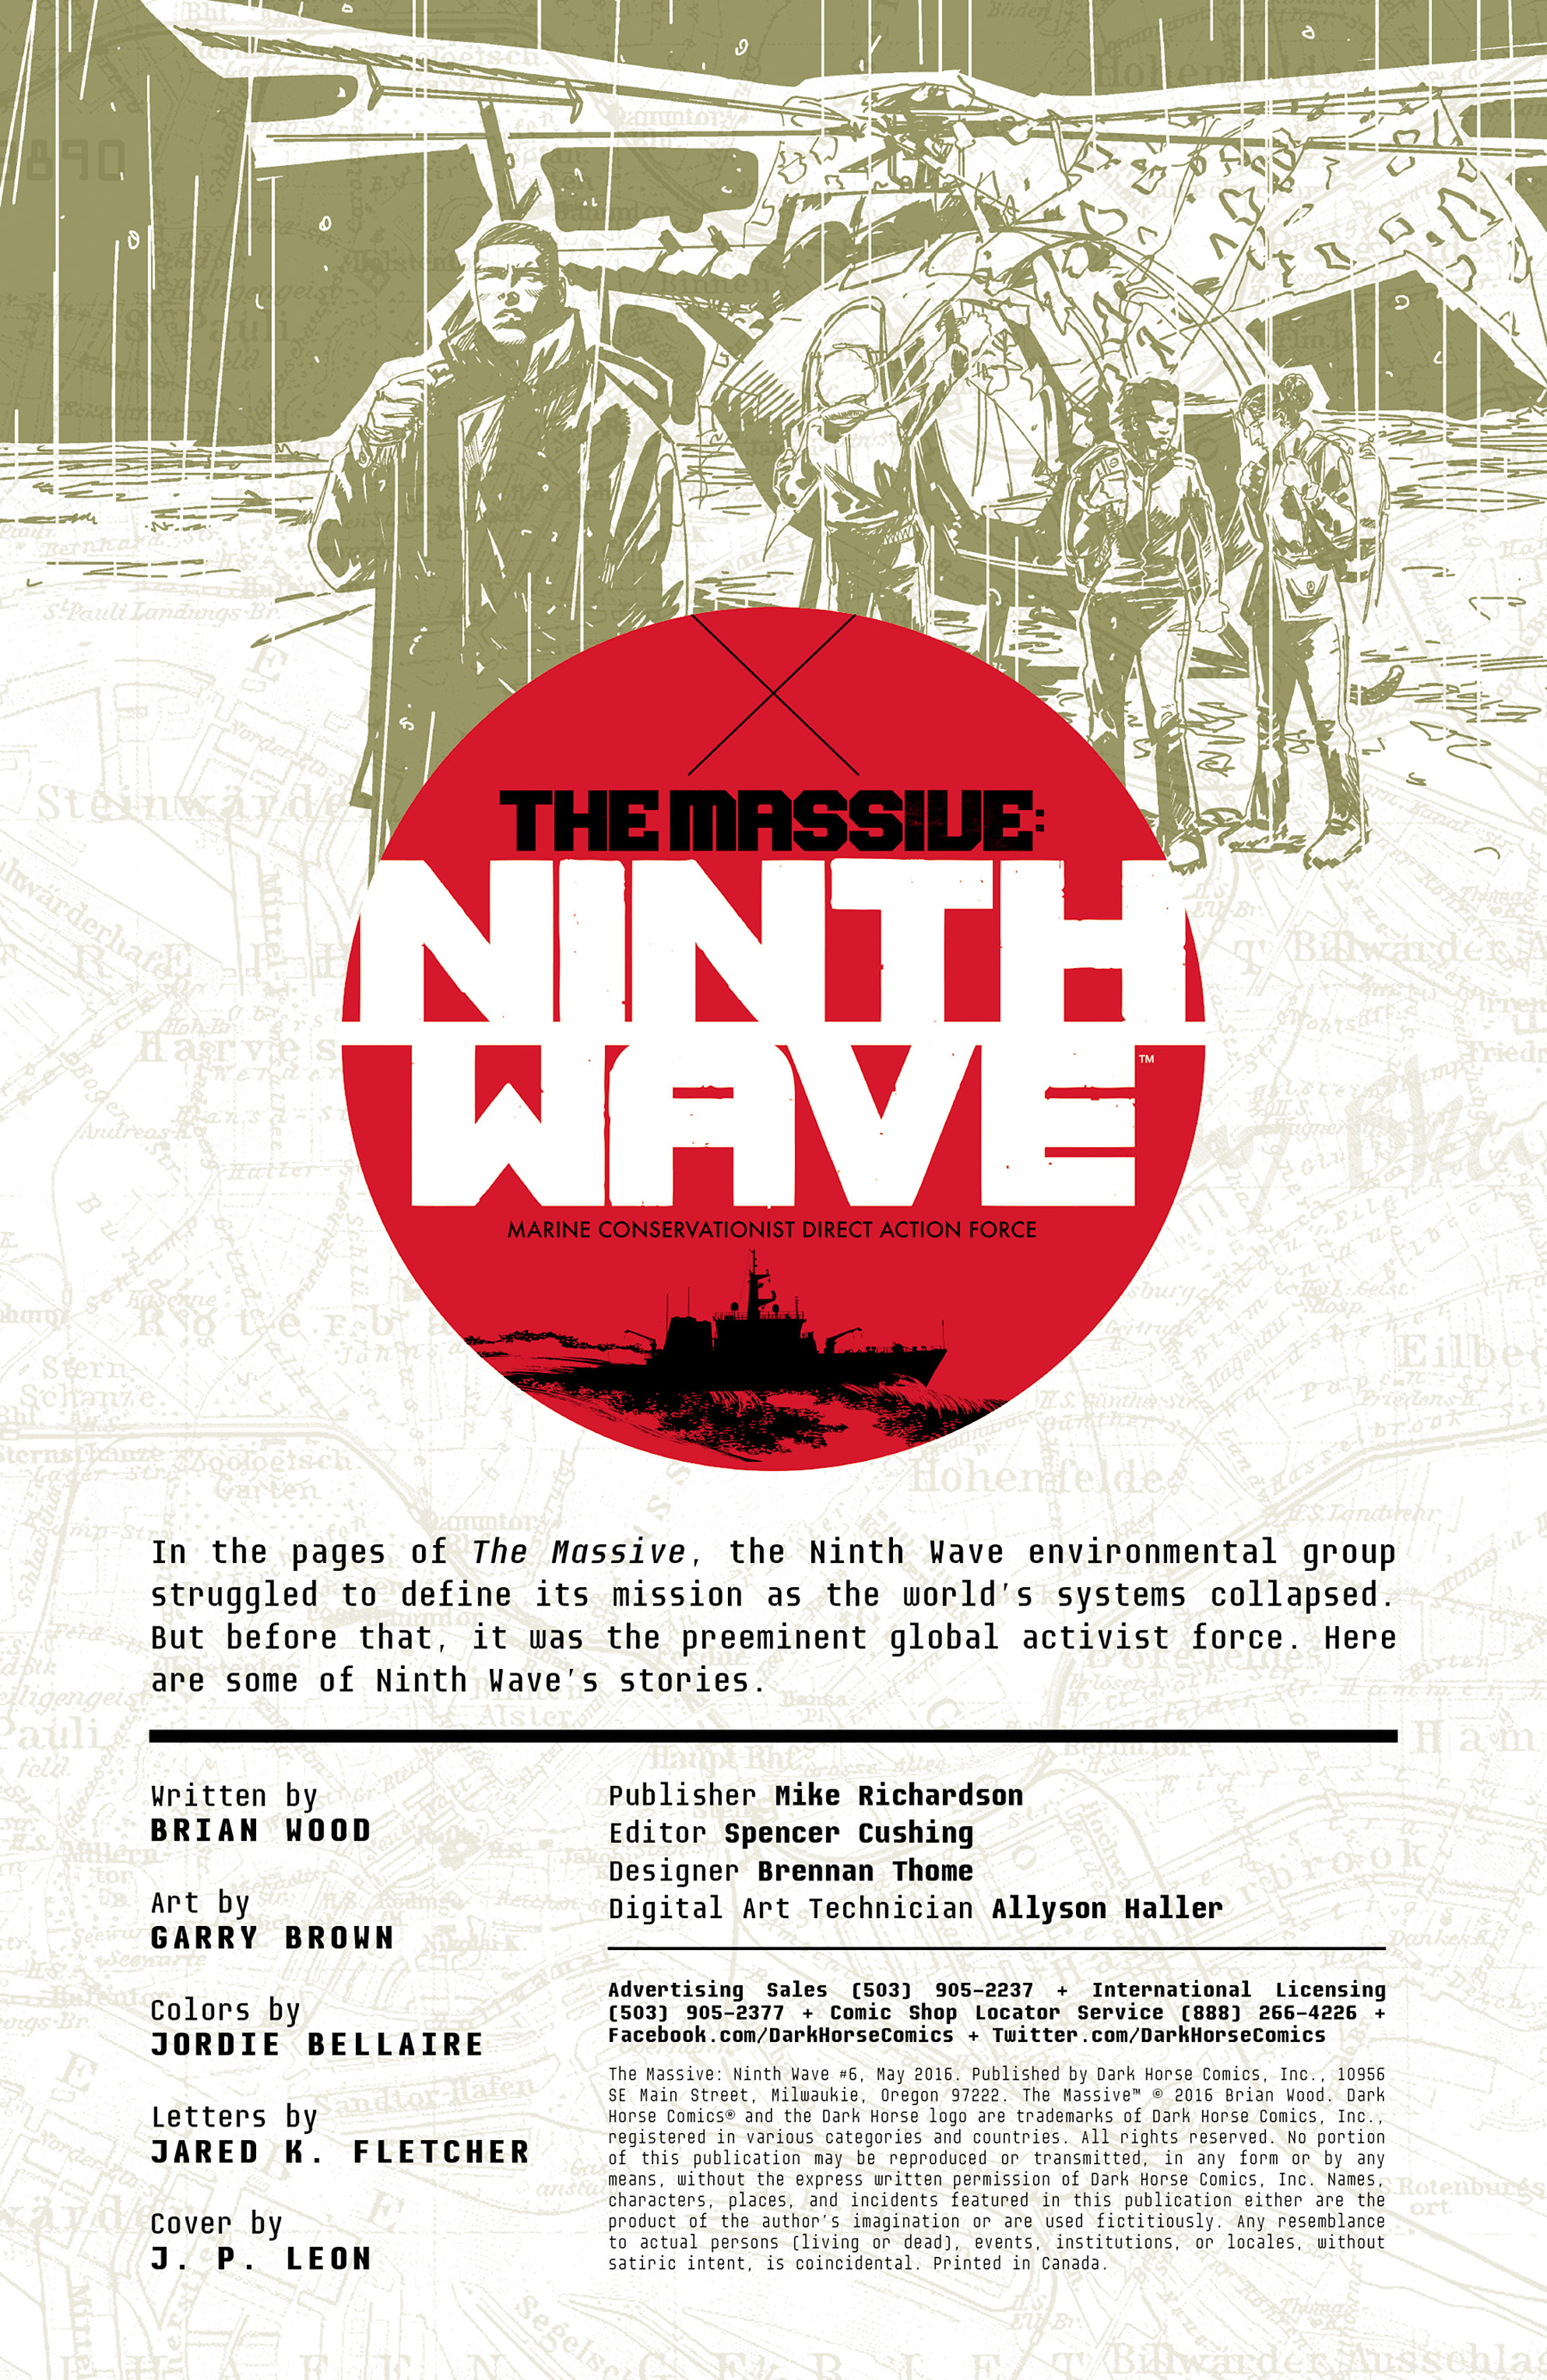 Read online The Massive: Ninth Wave comic -  Issue #6 - 2